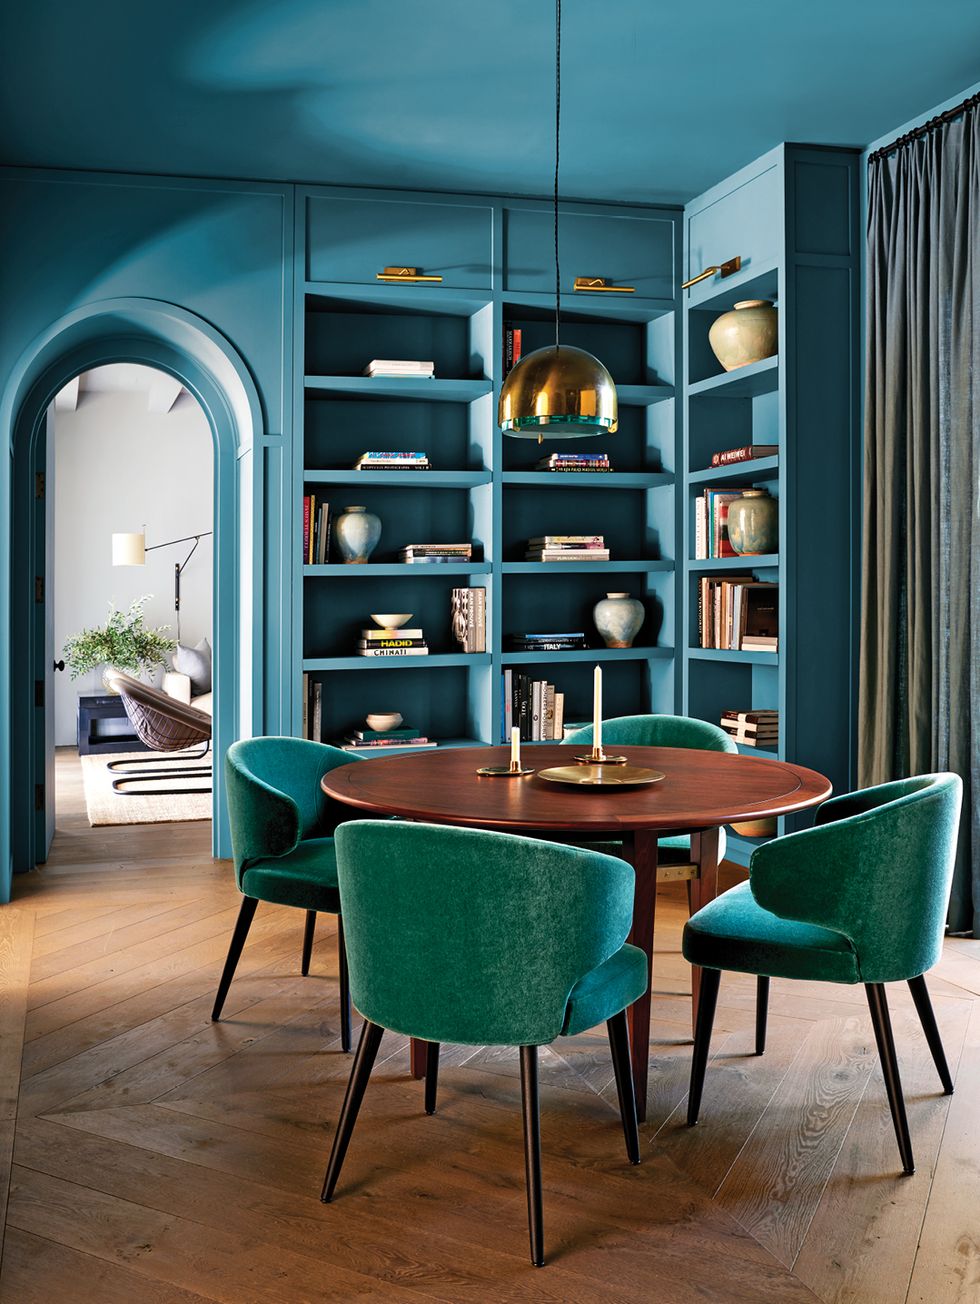 Room, Furniture, Dining room, Interior design, Turquoise, Blue, Green, Building, Table, Wall, 